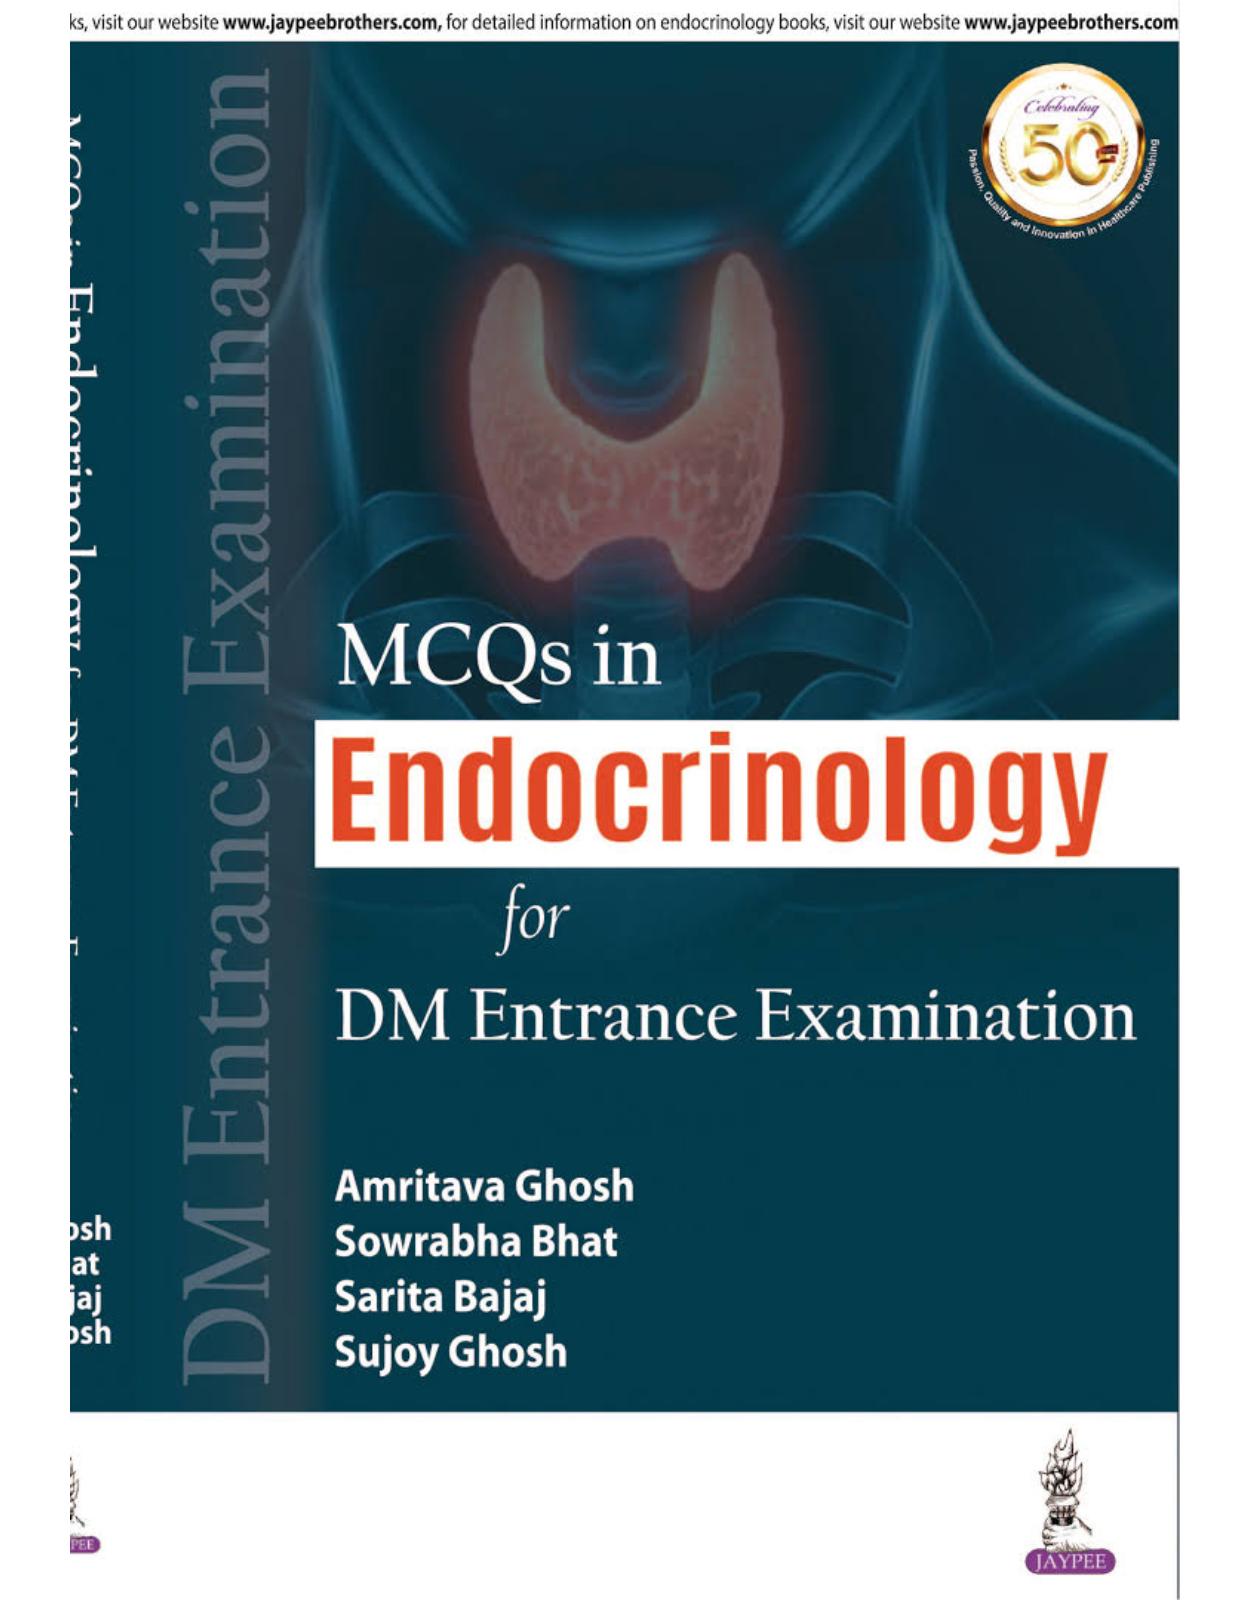 MCQs in Endocrinology for DM ENTRANCE EXAMINATION